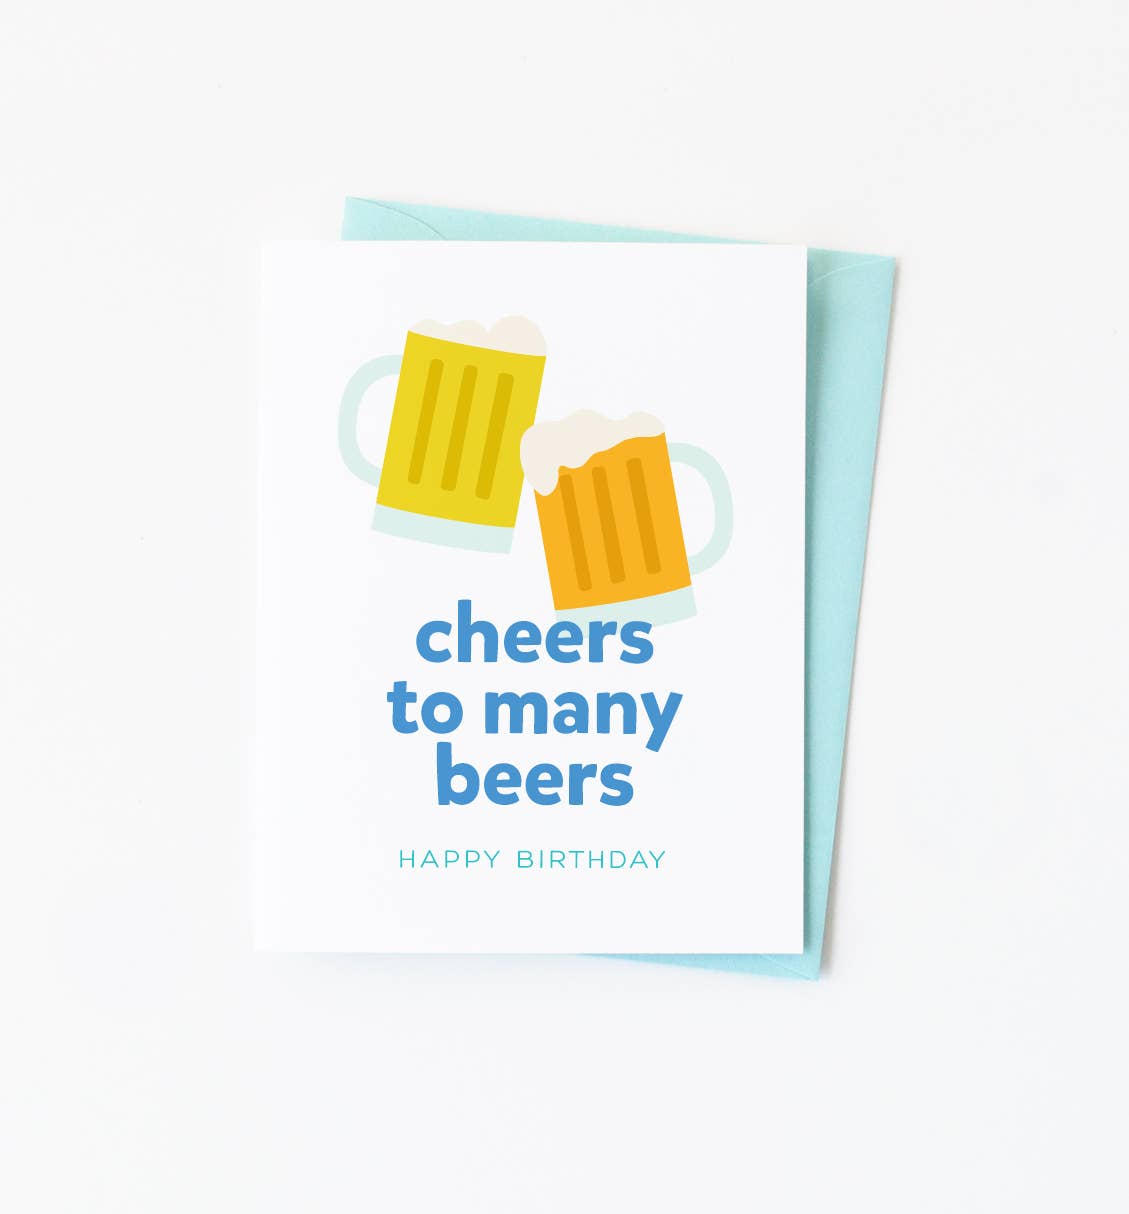 Many Beers Birthday Card